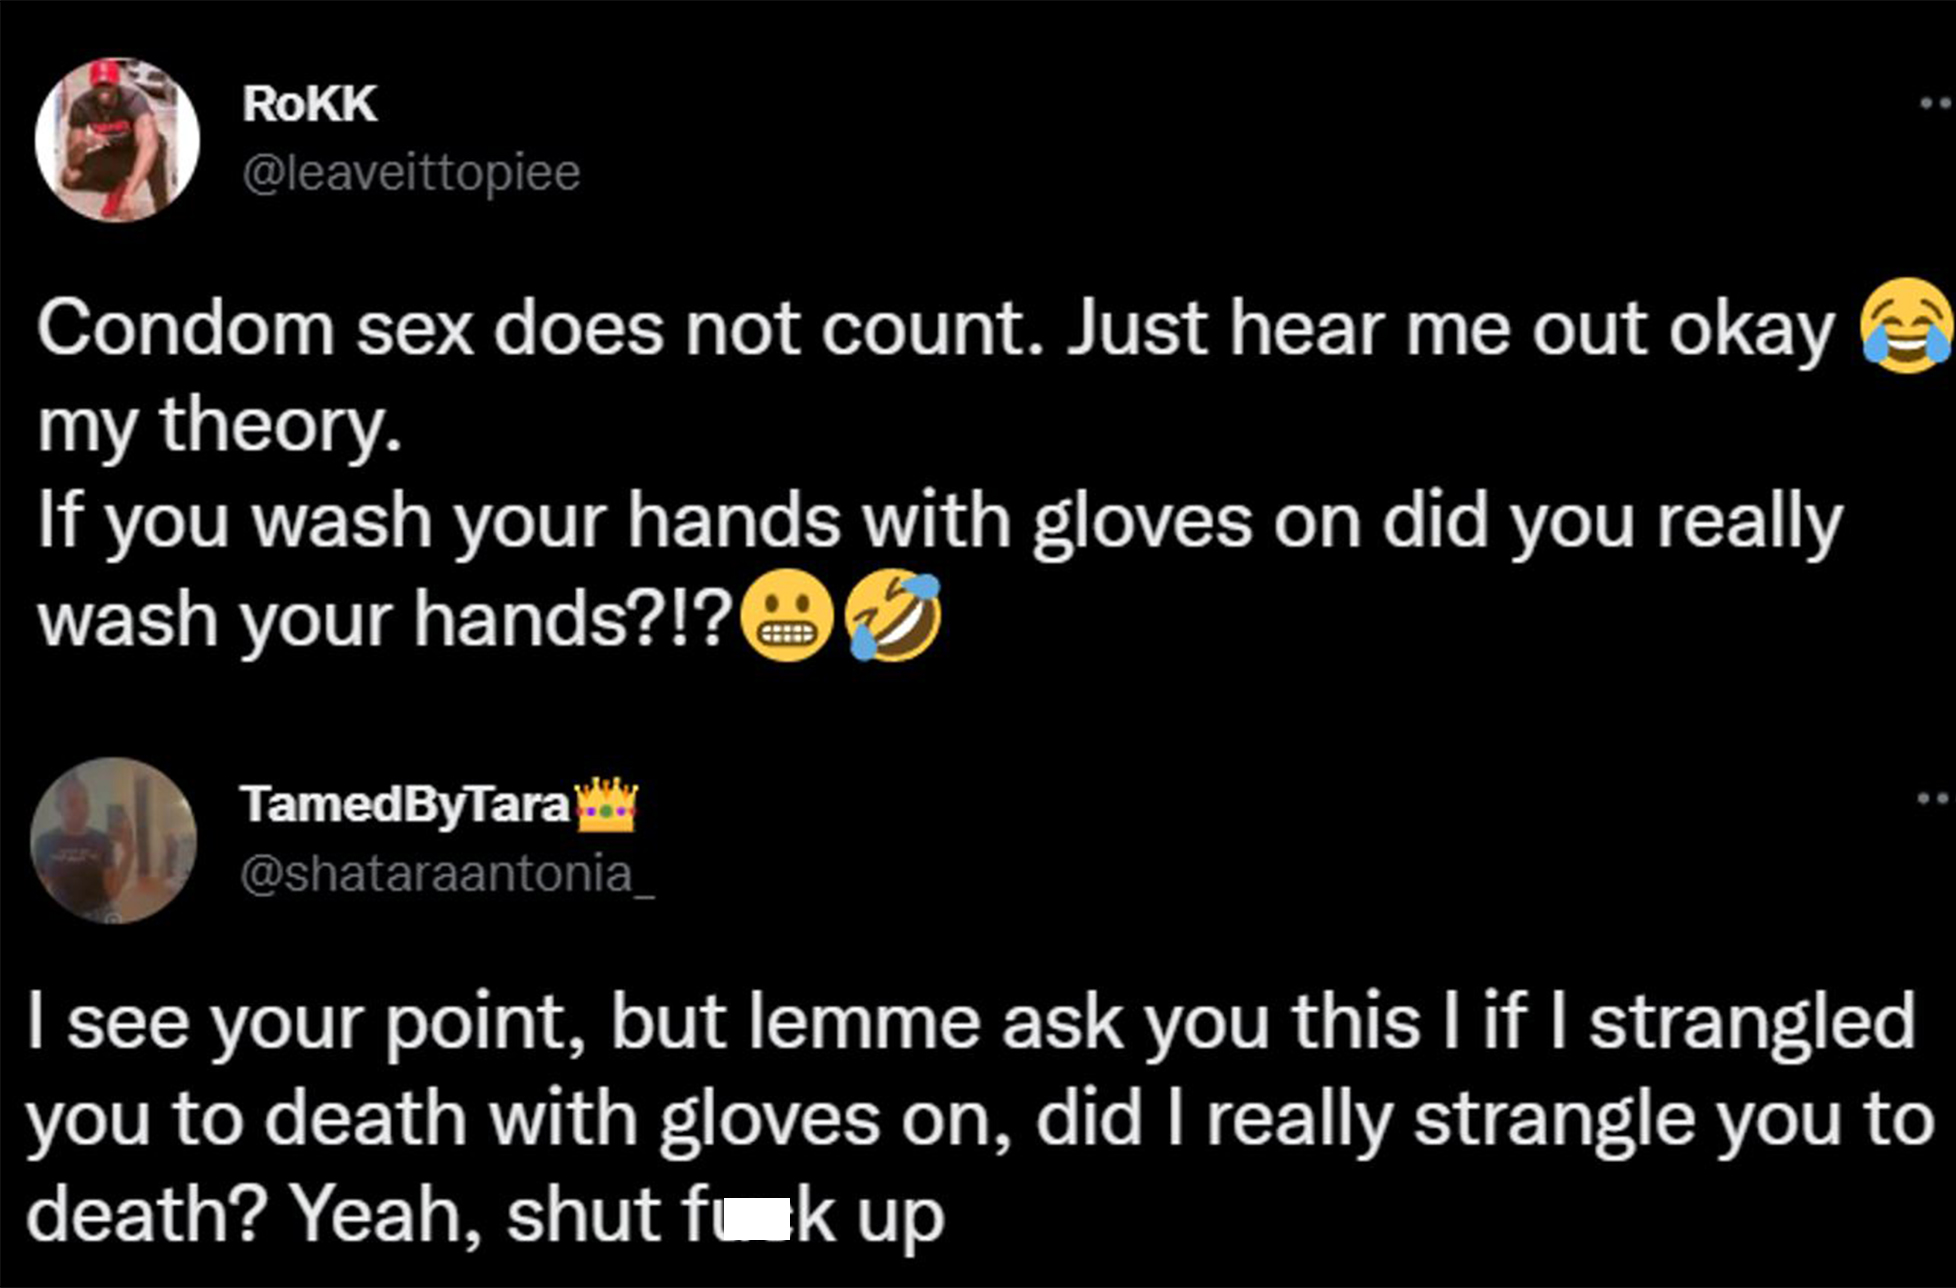 savage clapbacks - get help - Rokk Condom sex does not count. Just hear me out okay my theory. If you wash your hands with gloves on did you really wash your hands?!? Cete TamedByTara I see your point, but lemme ask you this lif I strangled you to death w